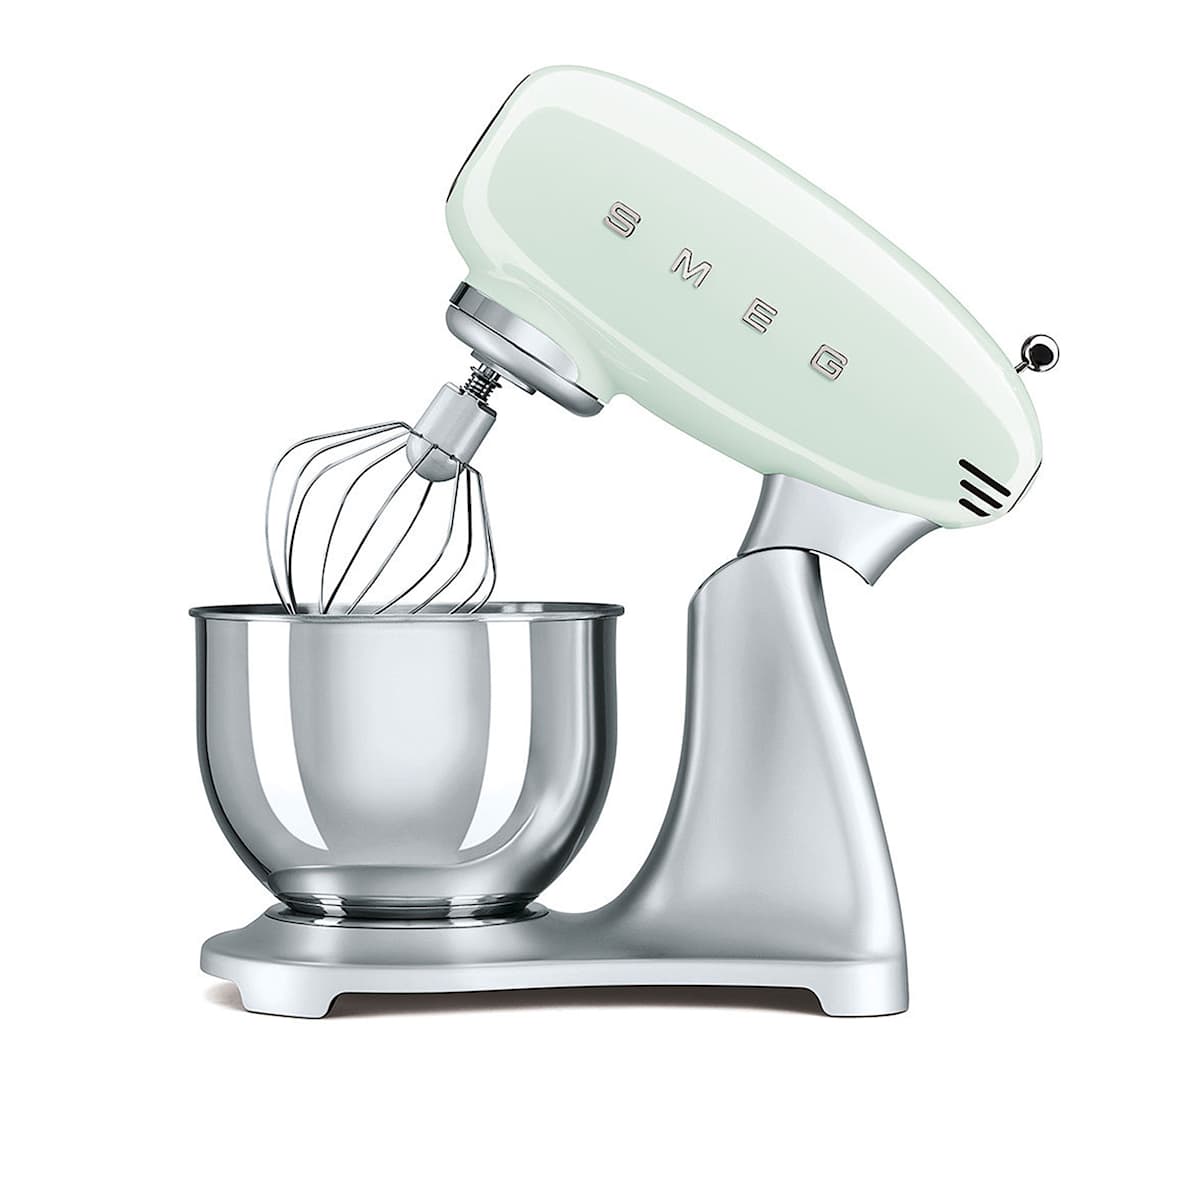 Smeg Accessories for Stand Mixer Slicer & grater